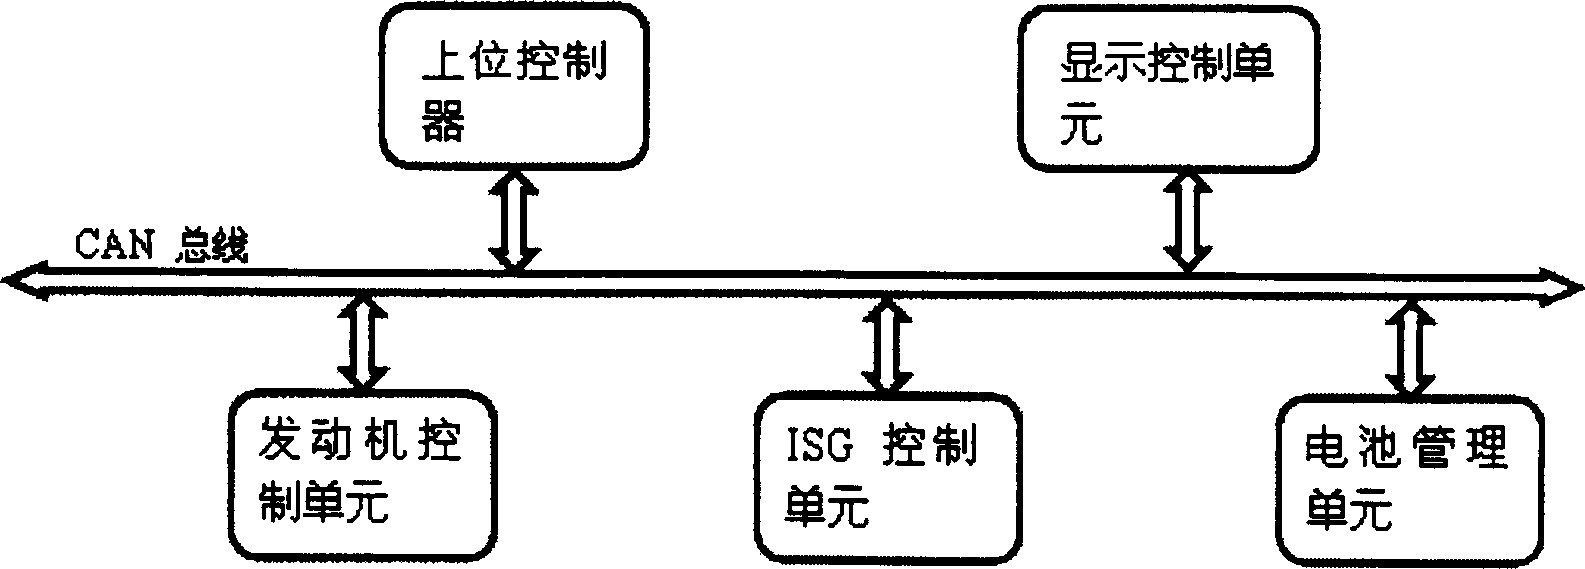 Local network structure of mixed dynamic vehicle controller